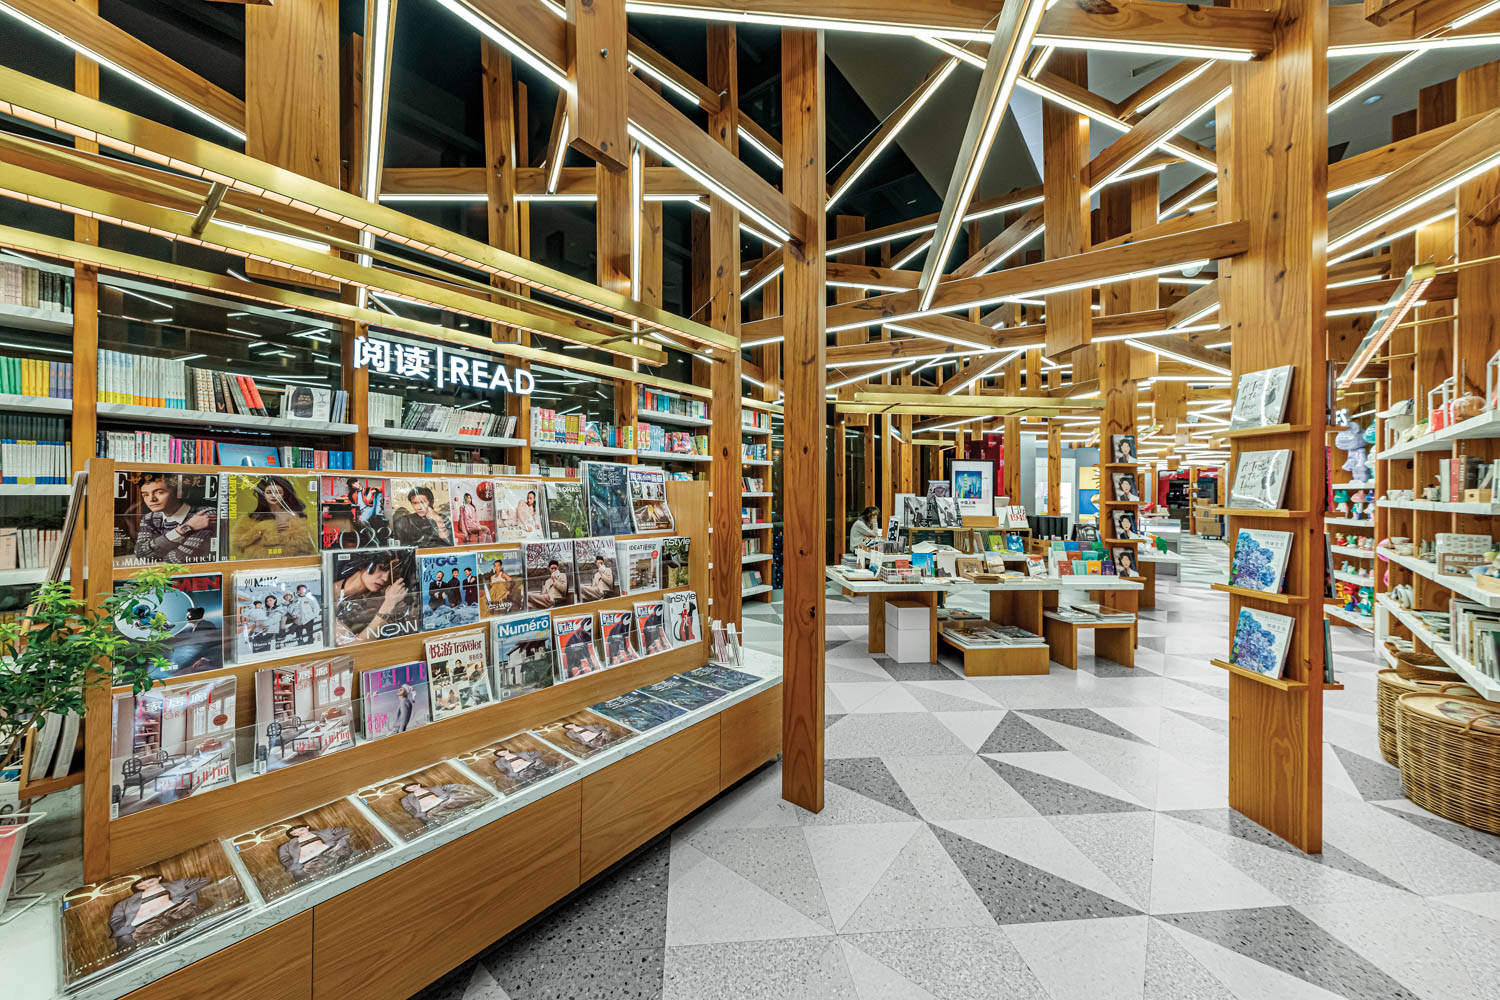 forestlike solid-pine beams and columns in an airport bookstore